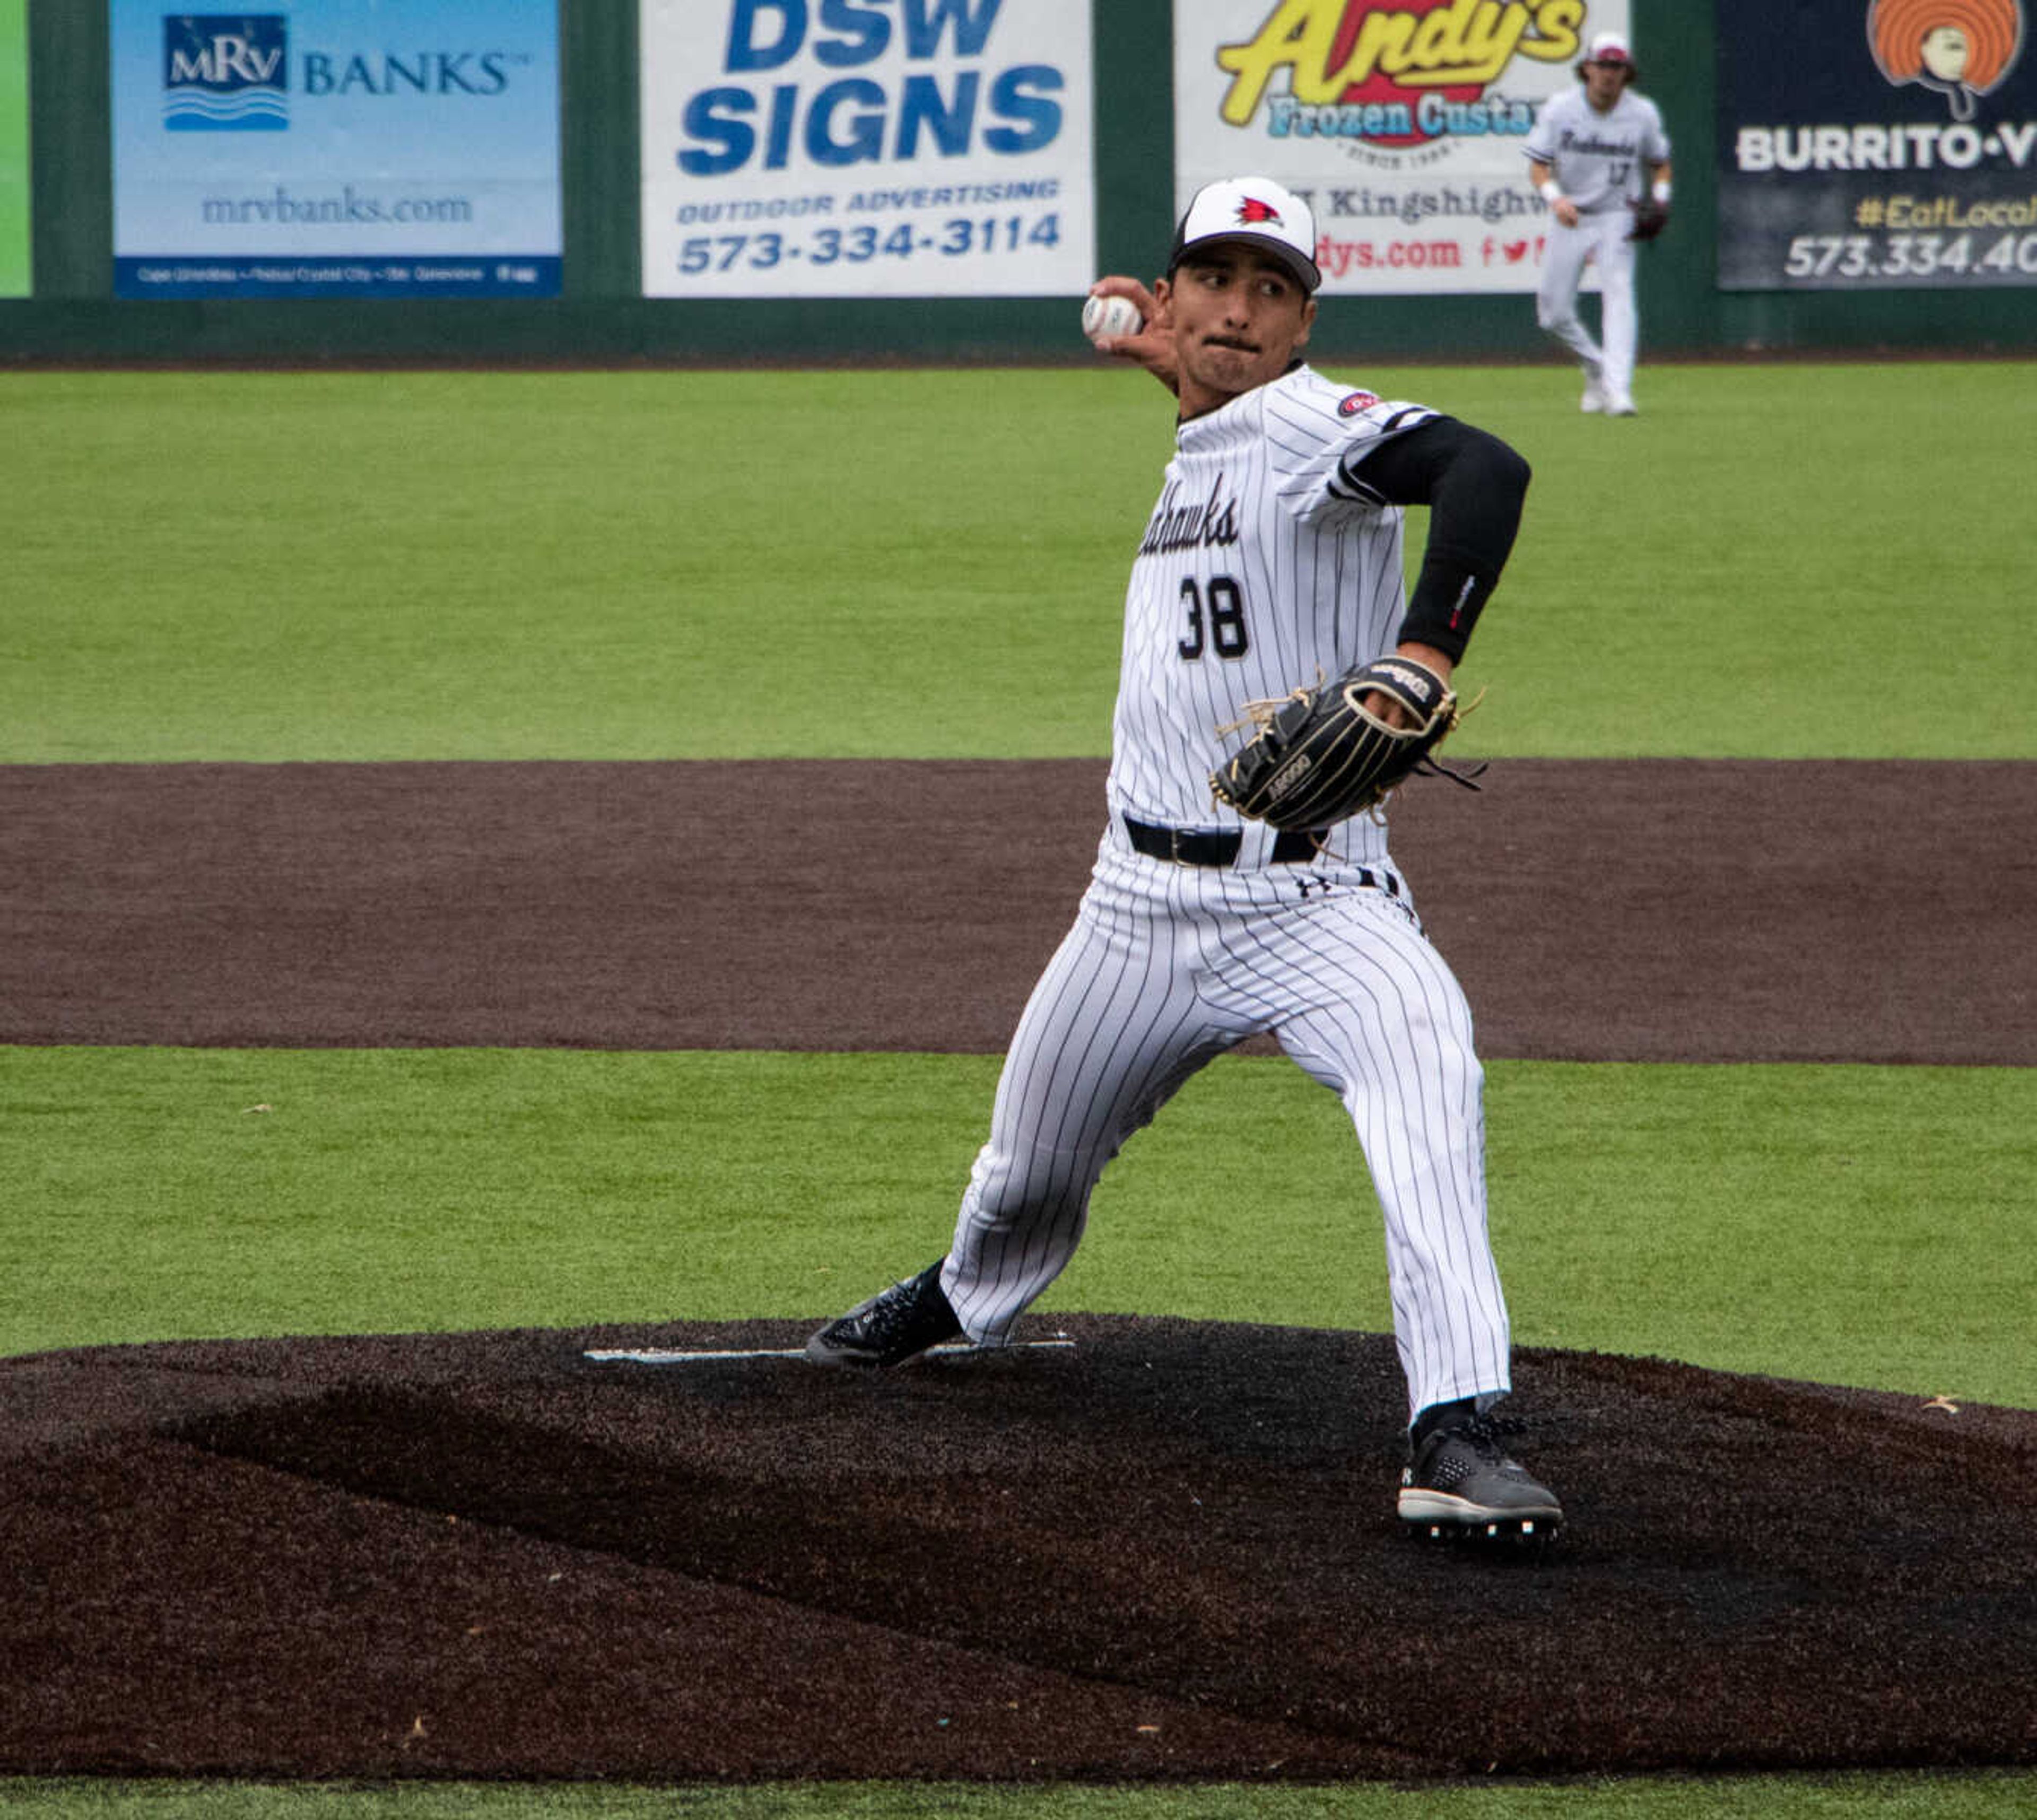 Right handed pitcher Esteban Hernandez (38) begins to throw a pitch to the Evansville Aces. He struck out one batter and allowed two runs during the March 1 game.